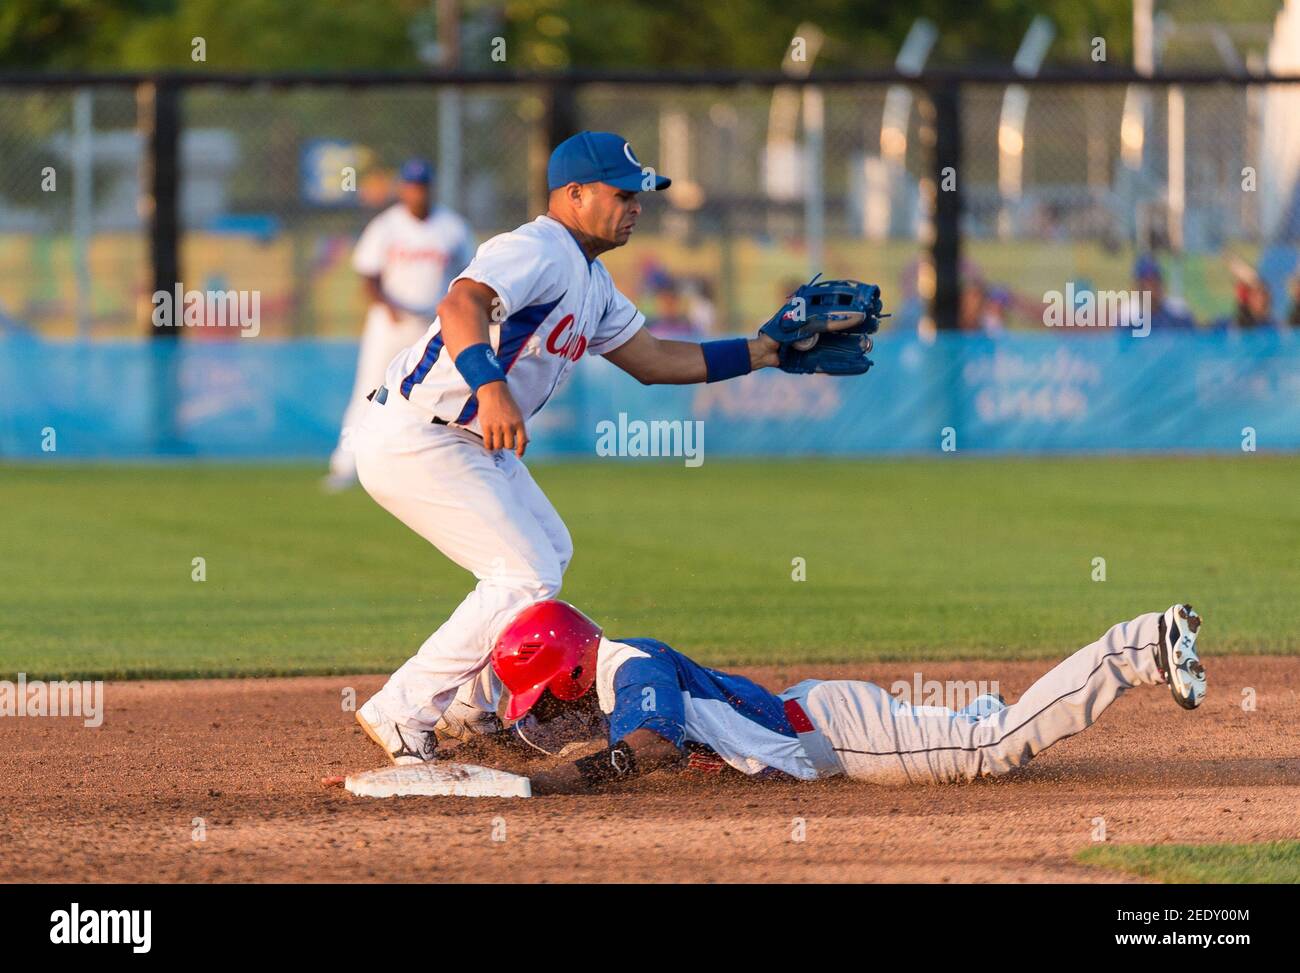 Toronto Panam Baseball 2015-Cuba vs the Dominican Republic: Dominican player steals second base and arrives save sliding with his hands Stock Photo